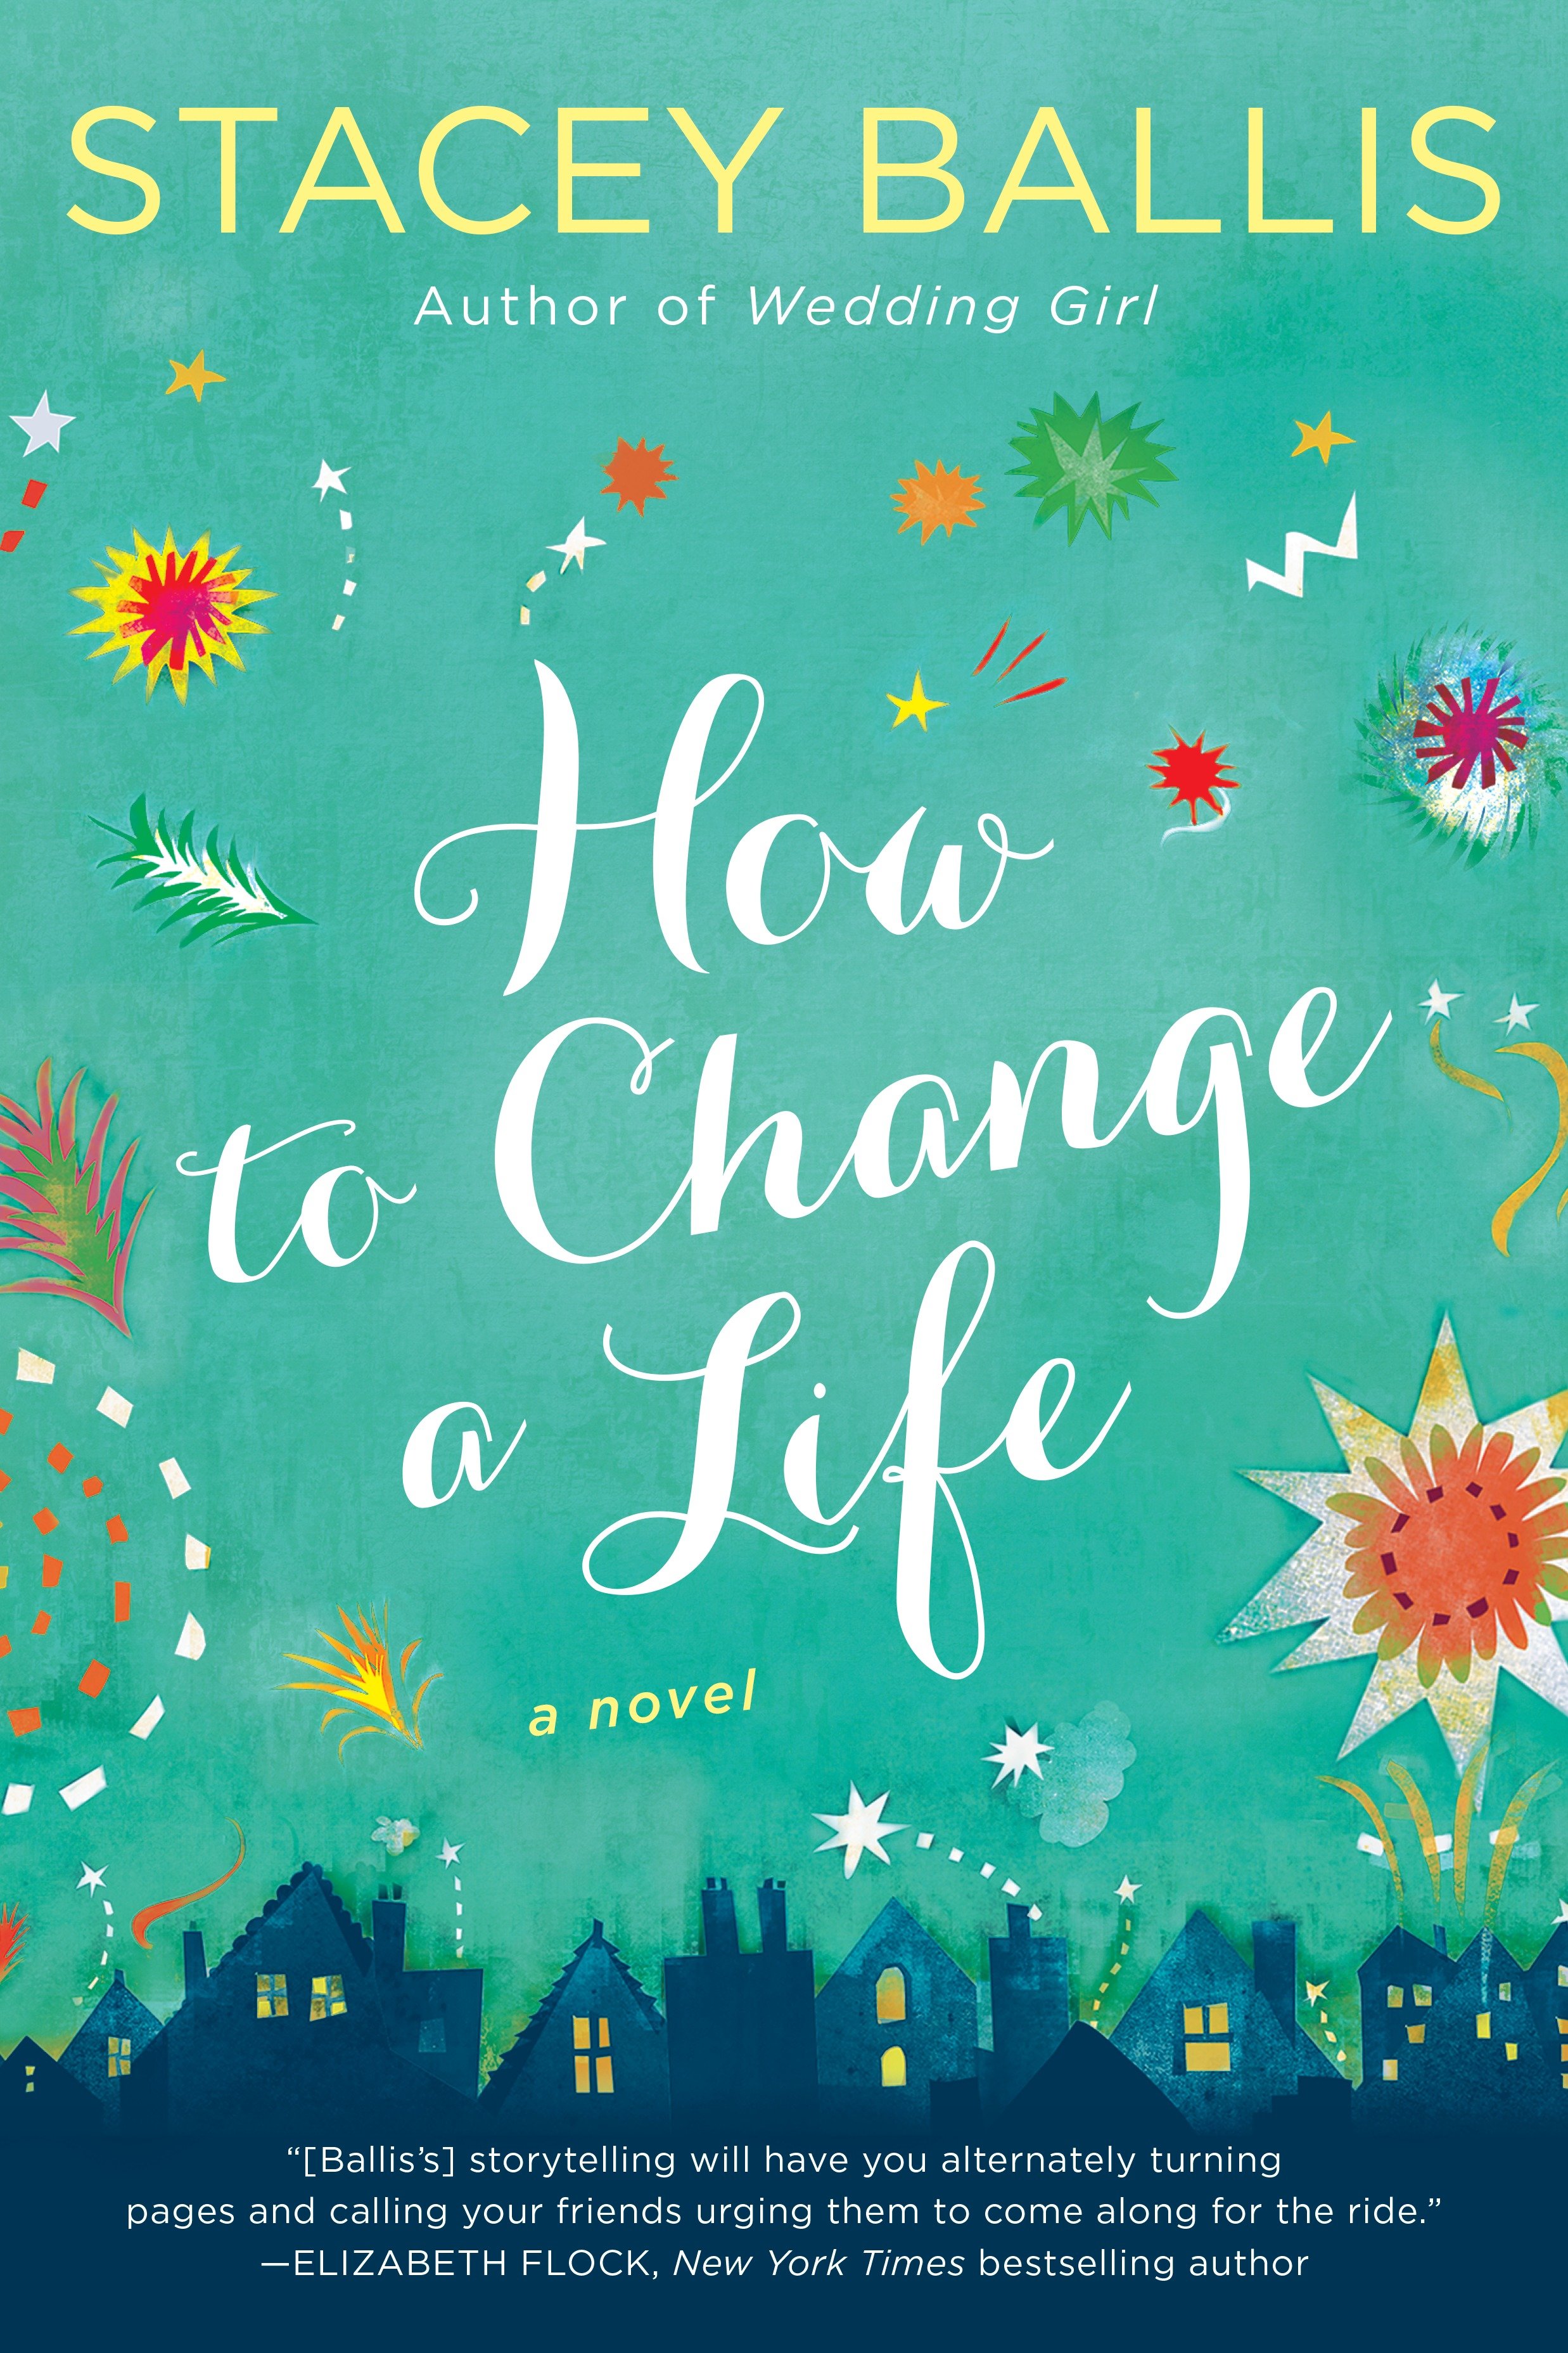 How to change a life cover image